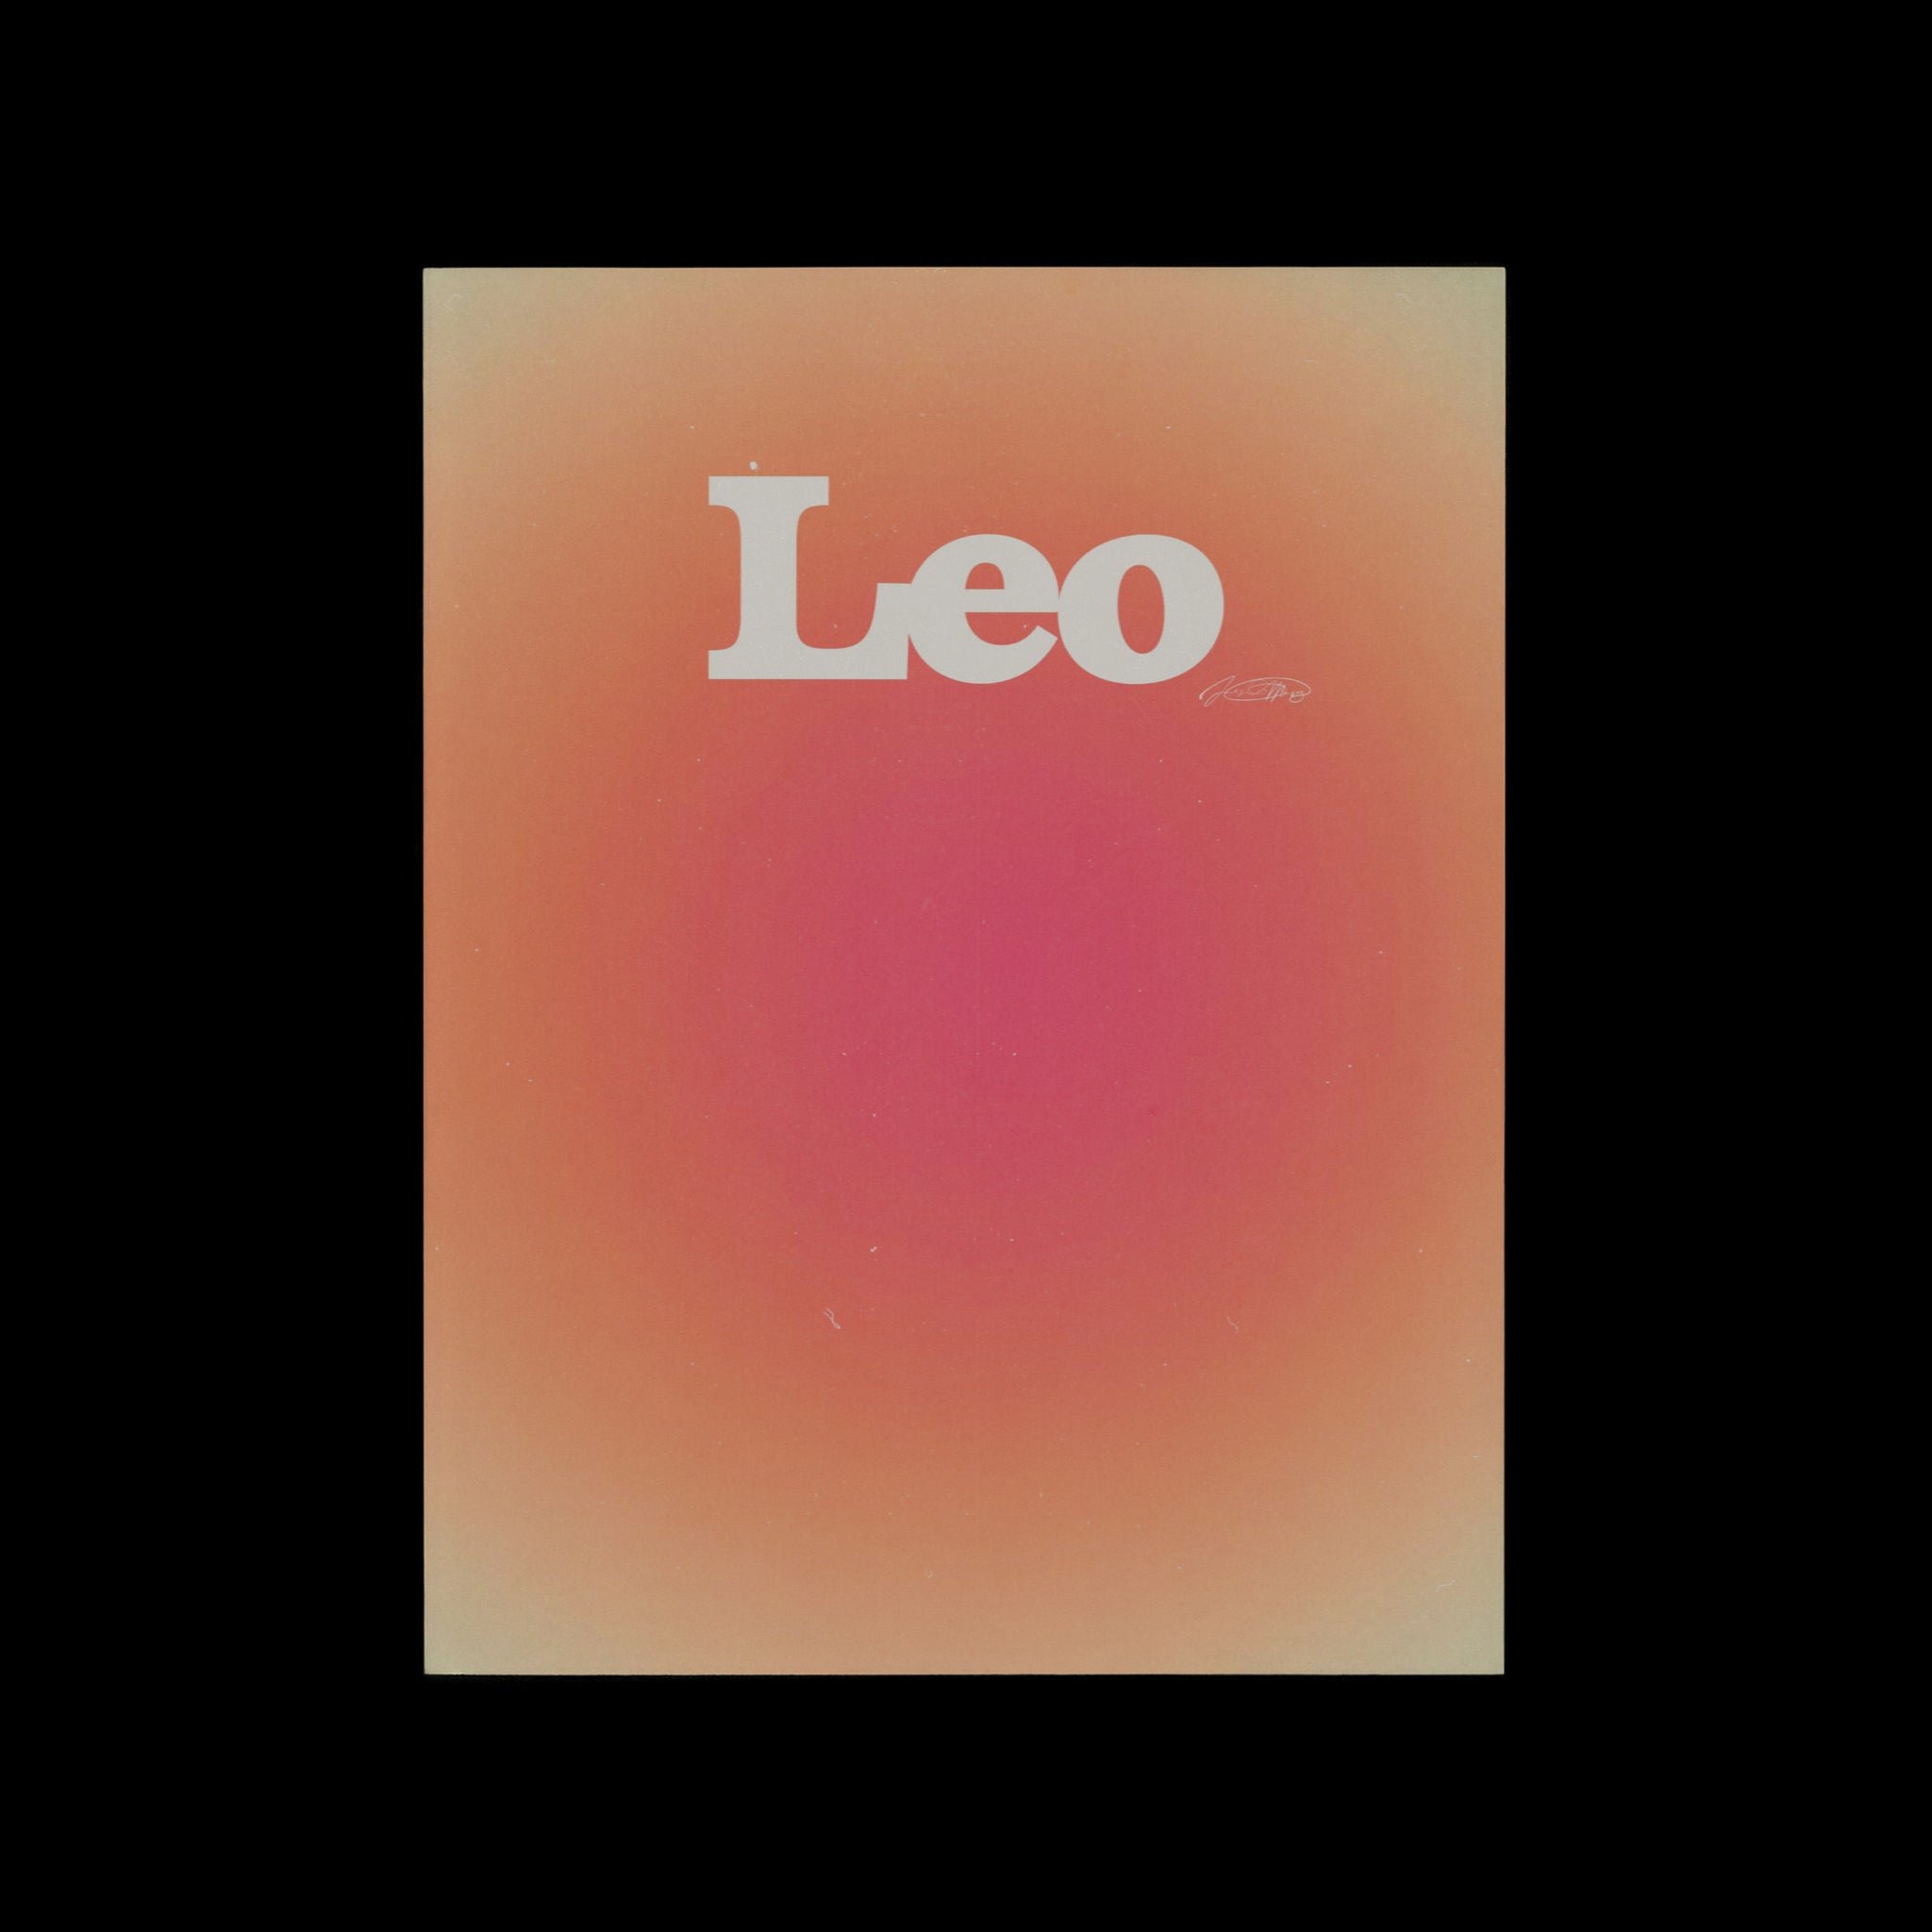 Leo Aura art print by Les Muses. Zodiac sign wall art. Aesthetic gradient star sign poster. Astrology artwork collection.